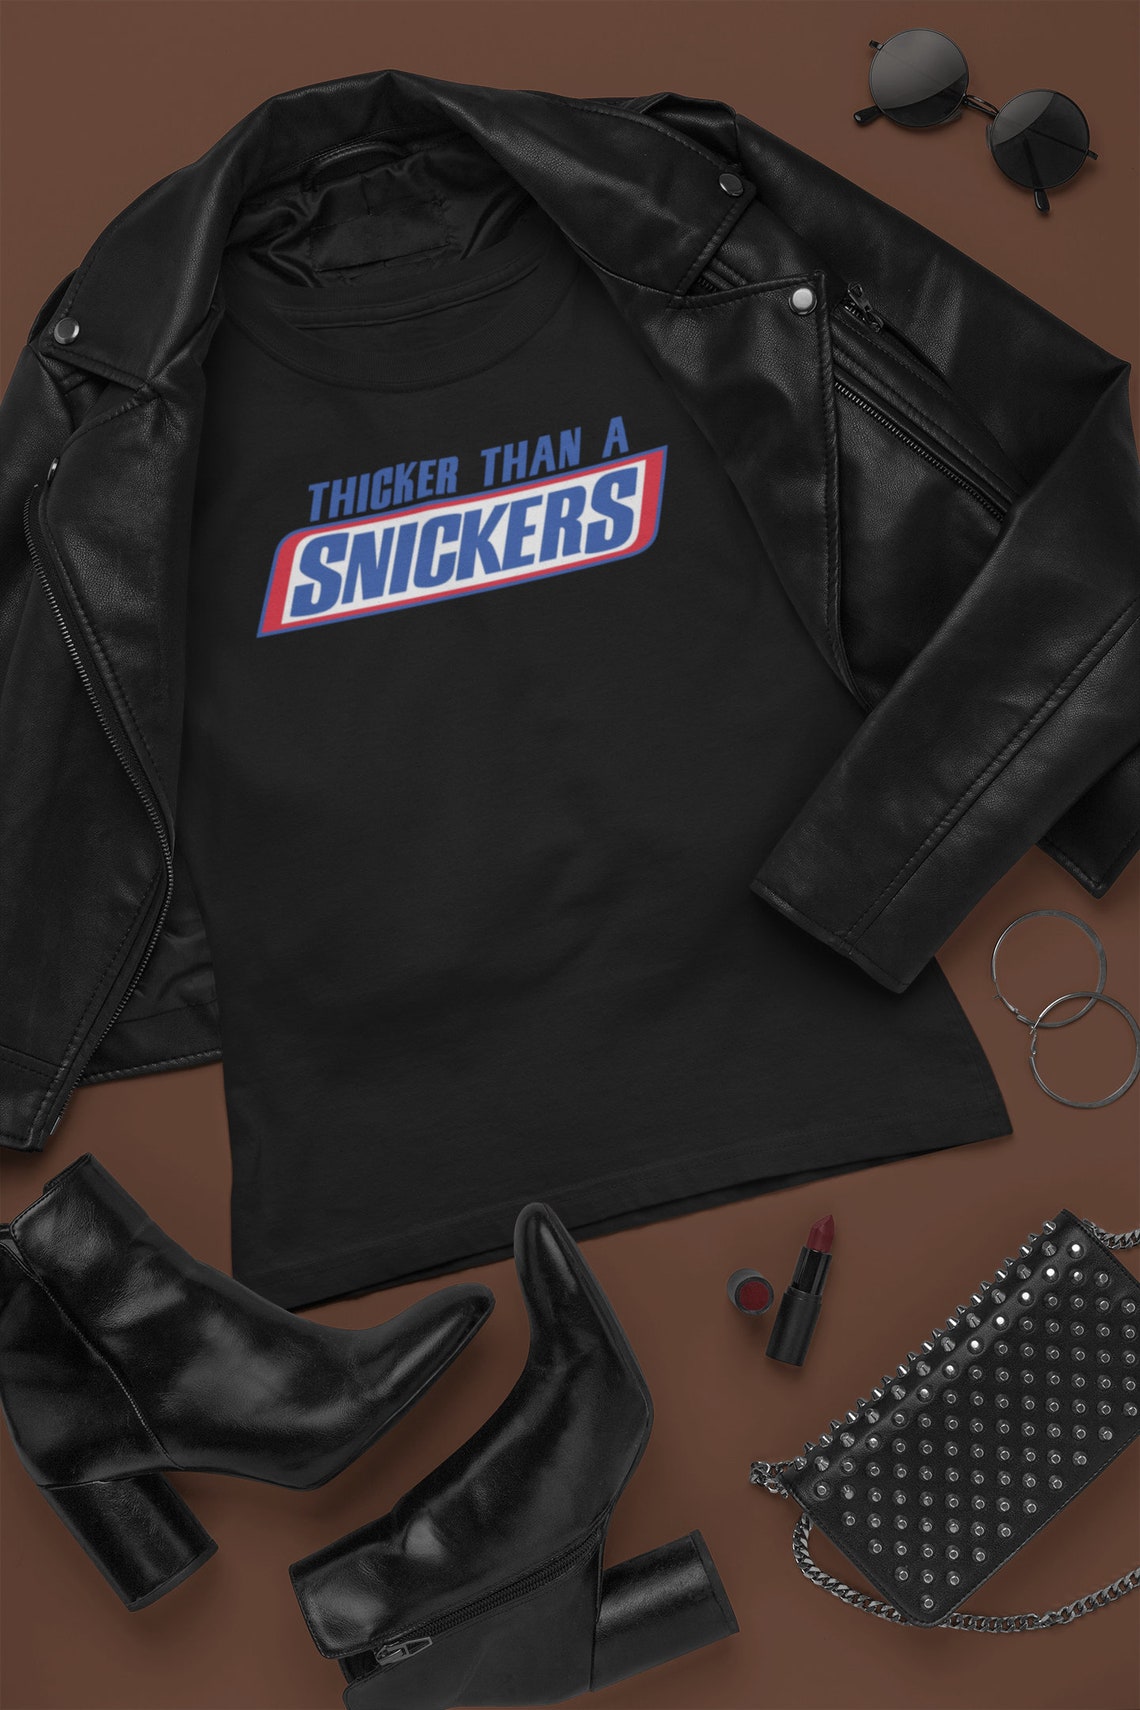 Thicker Than A Snickers SVG / PNG Cut File | Etsy